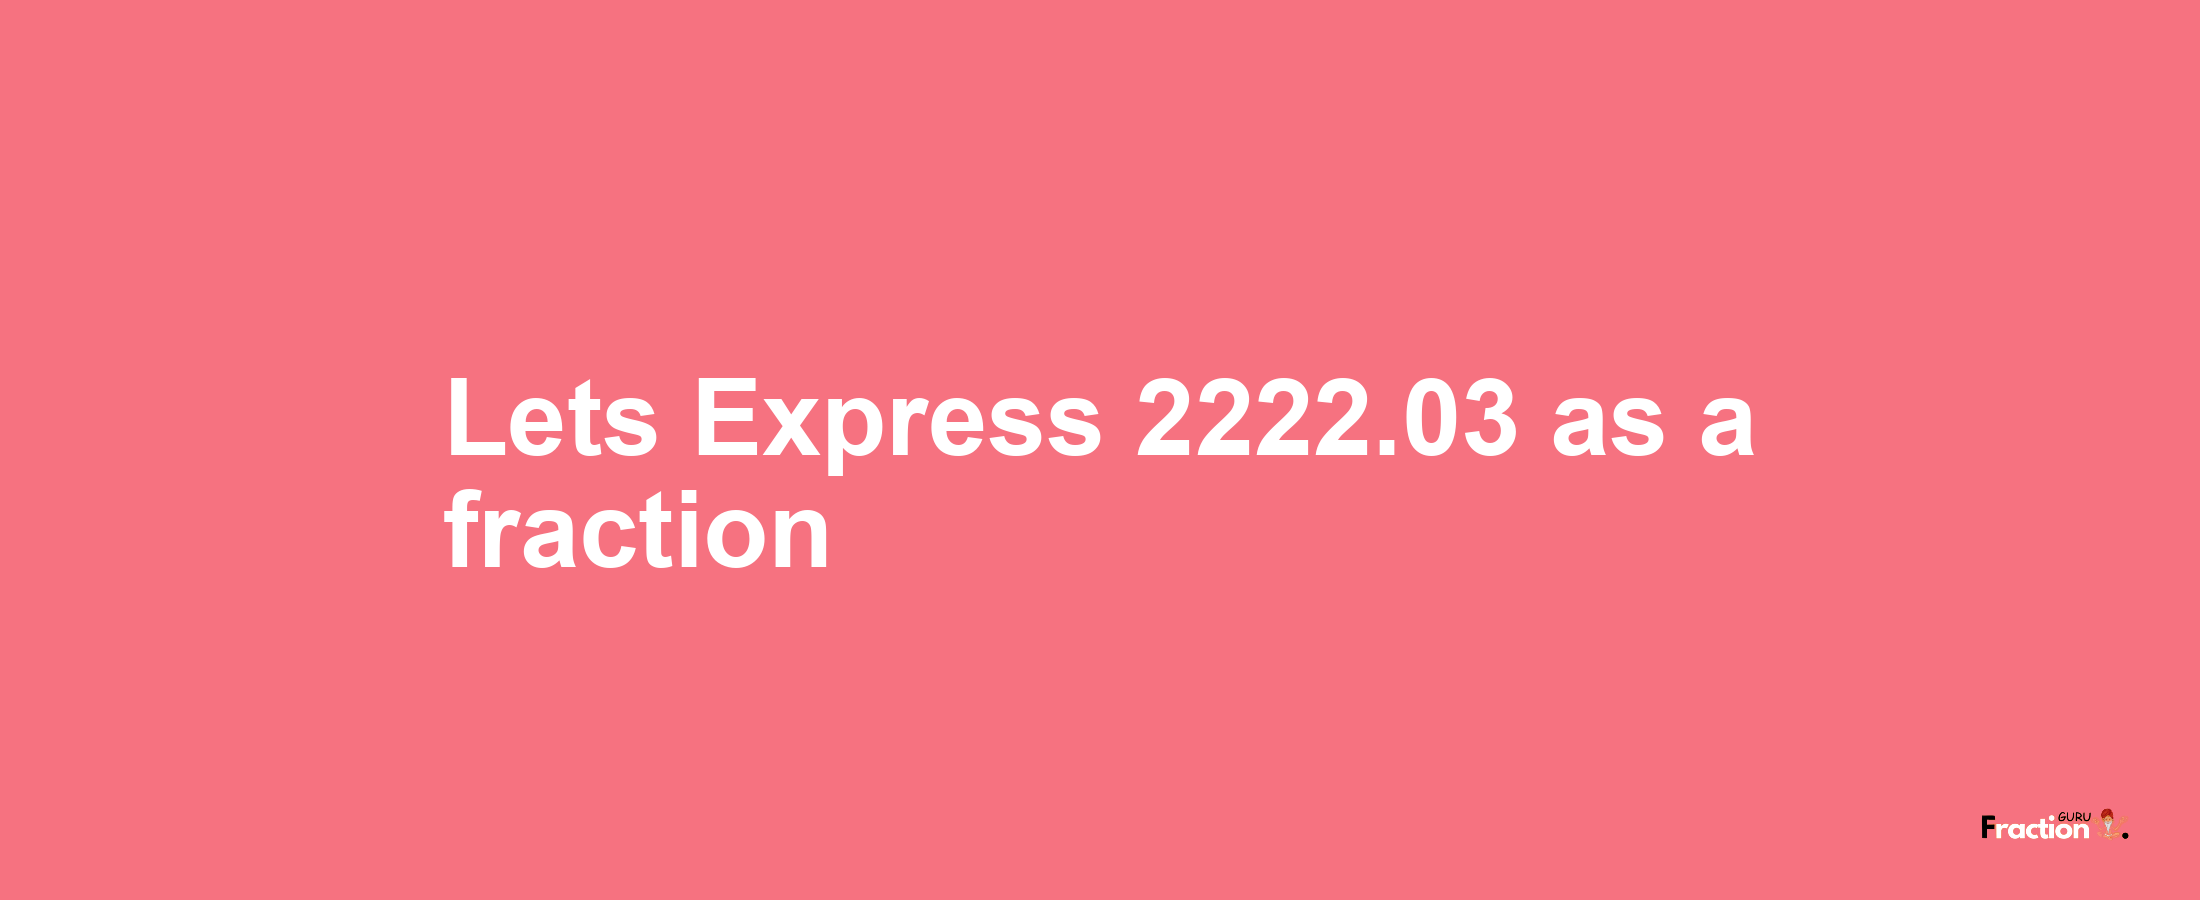 Lets Express 2222.03 as afraction